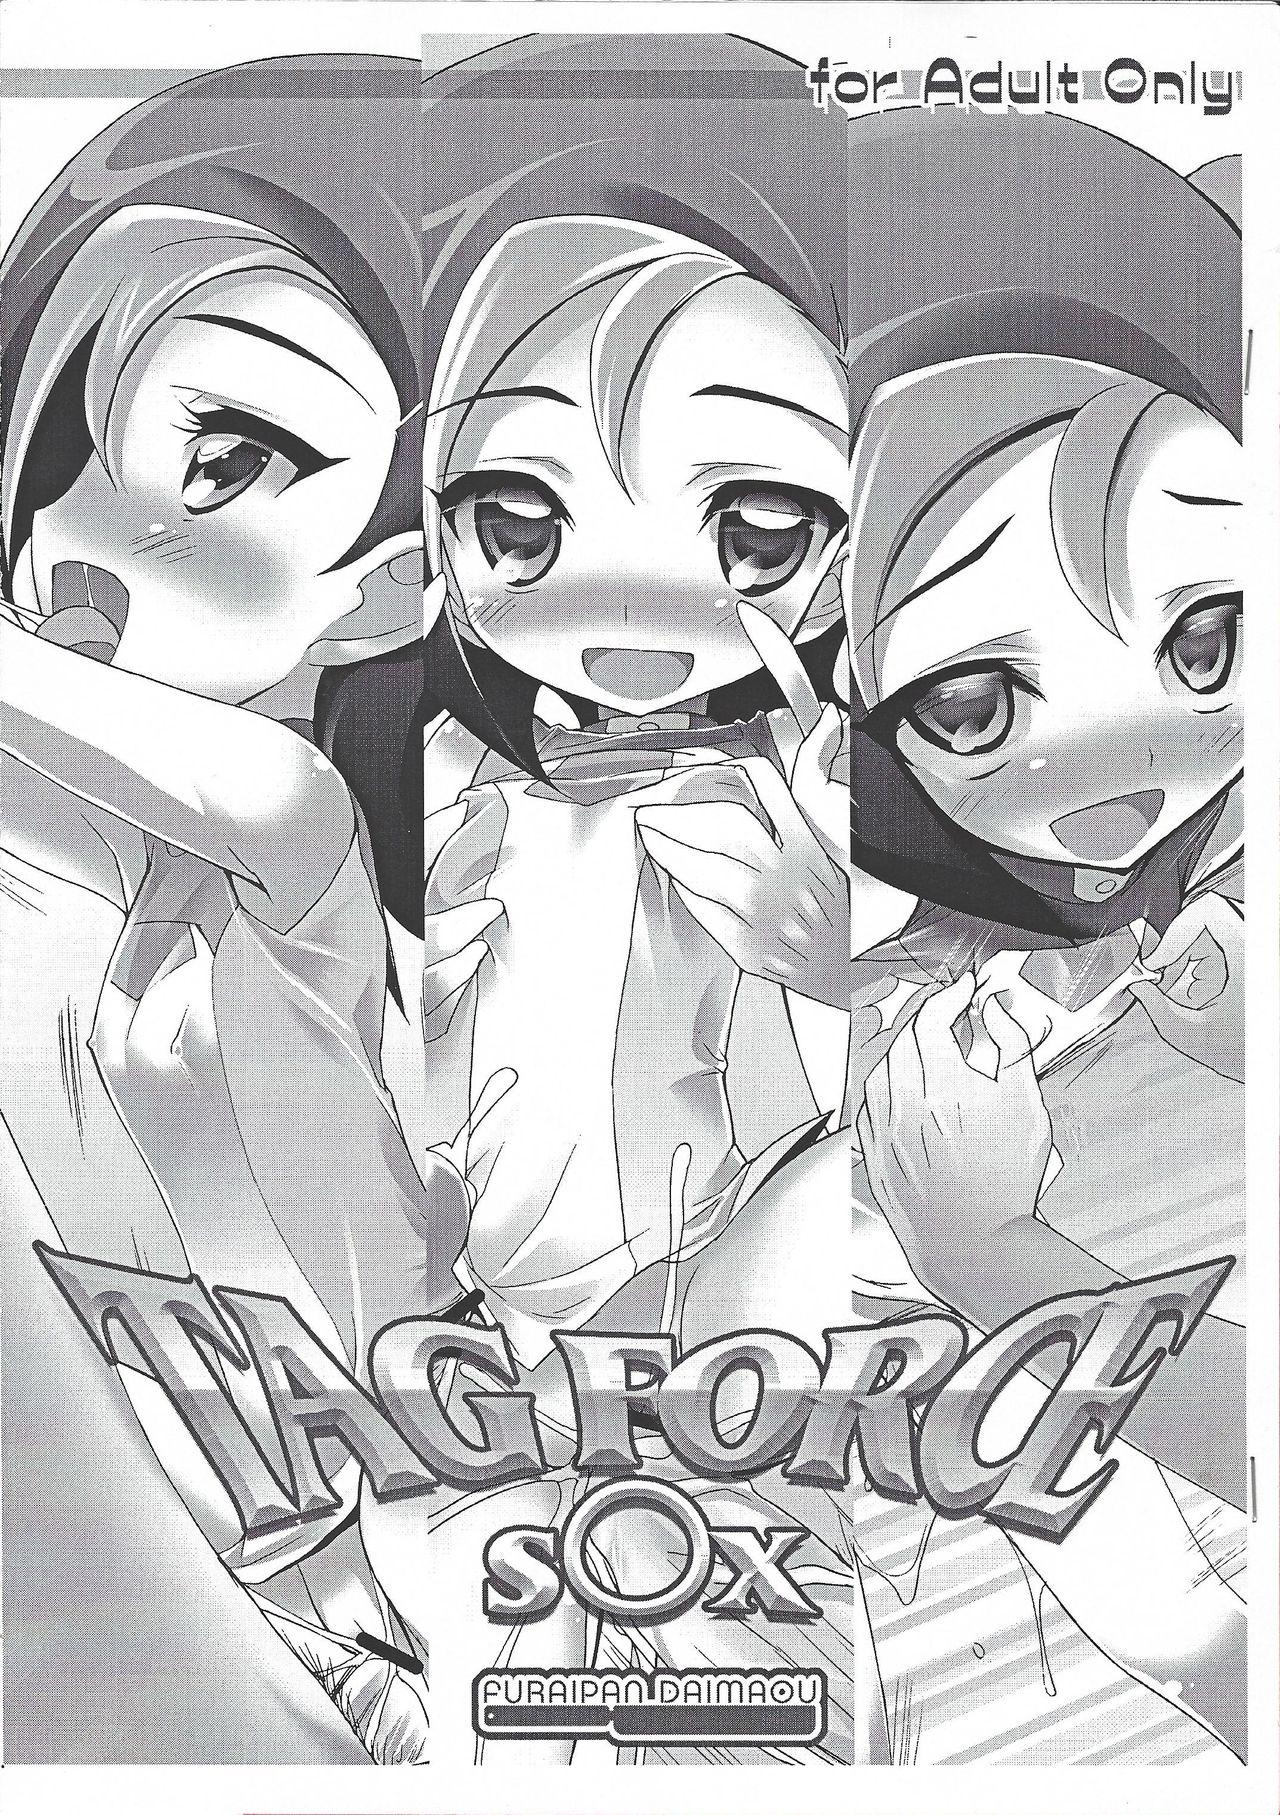 Hungarian TAG FORCE SEX - Yu-gi-oh zexal Lips - Page 1